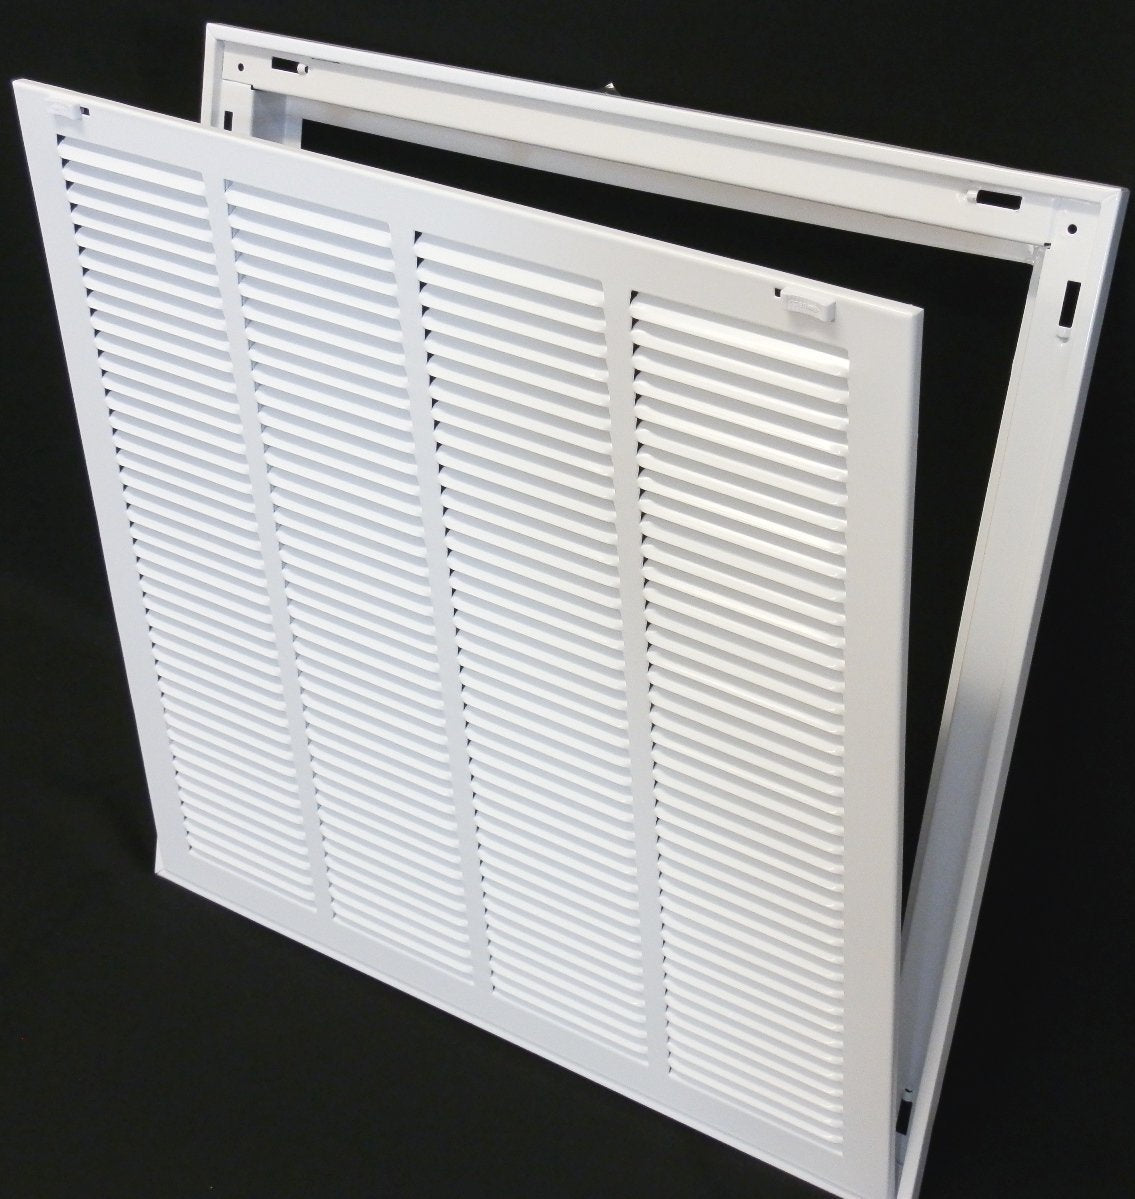 24&quot; X 28&quot; Steel Return Air Filter Grille for 1&quot; Filter - Removable Frame - [Outer Dimensions: 26 5/8&quot; X 30 5/8&quot;]